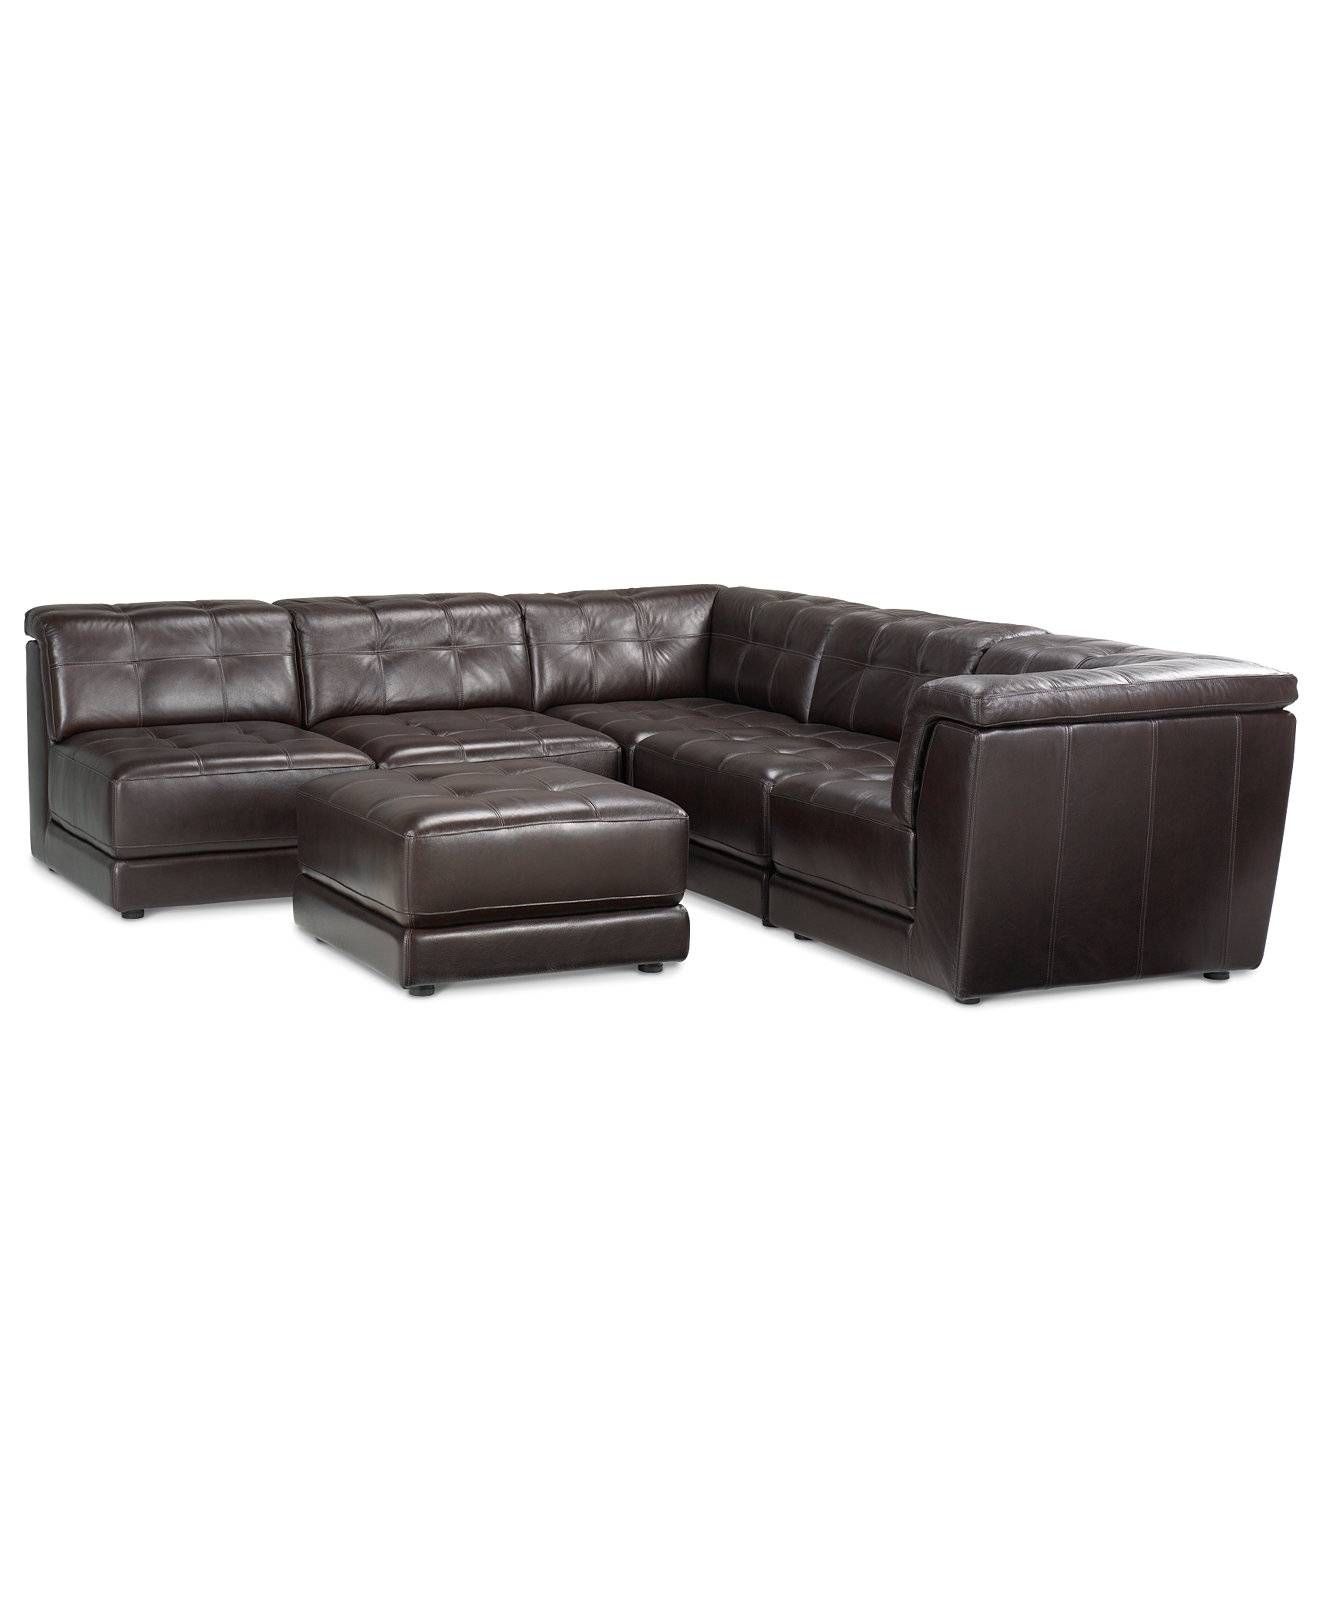 Cozy 6 Piece Leather Sectional Sofa 80 With Additional Camel Throughout Camel Colored Sectional Sofa (Photo 29 of 30)